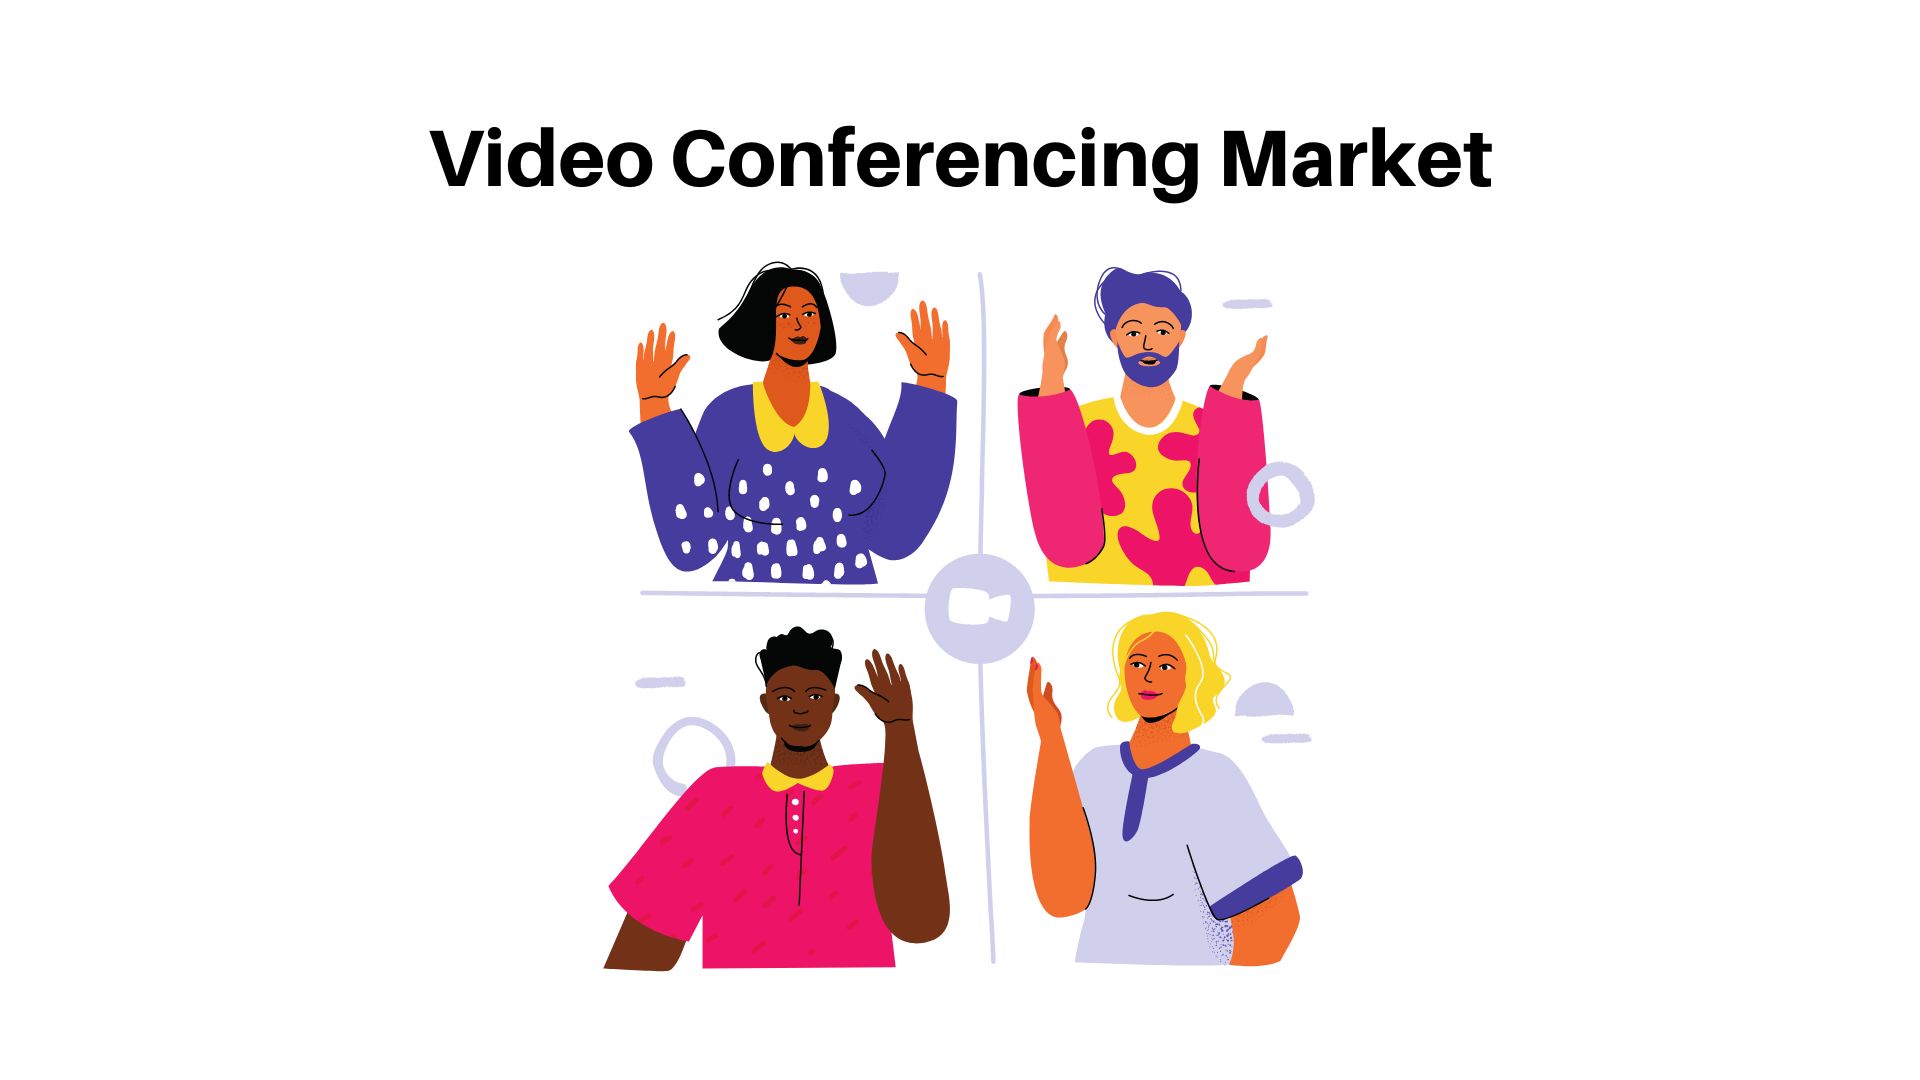 Global Video Conferencing Market Size (USD 21 billion by 2032) with 11.8% CAGR